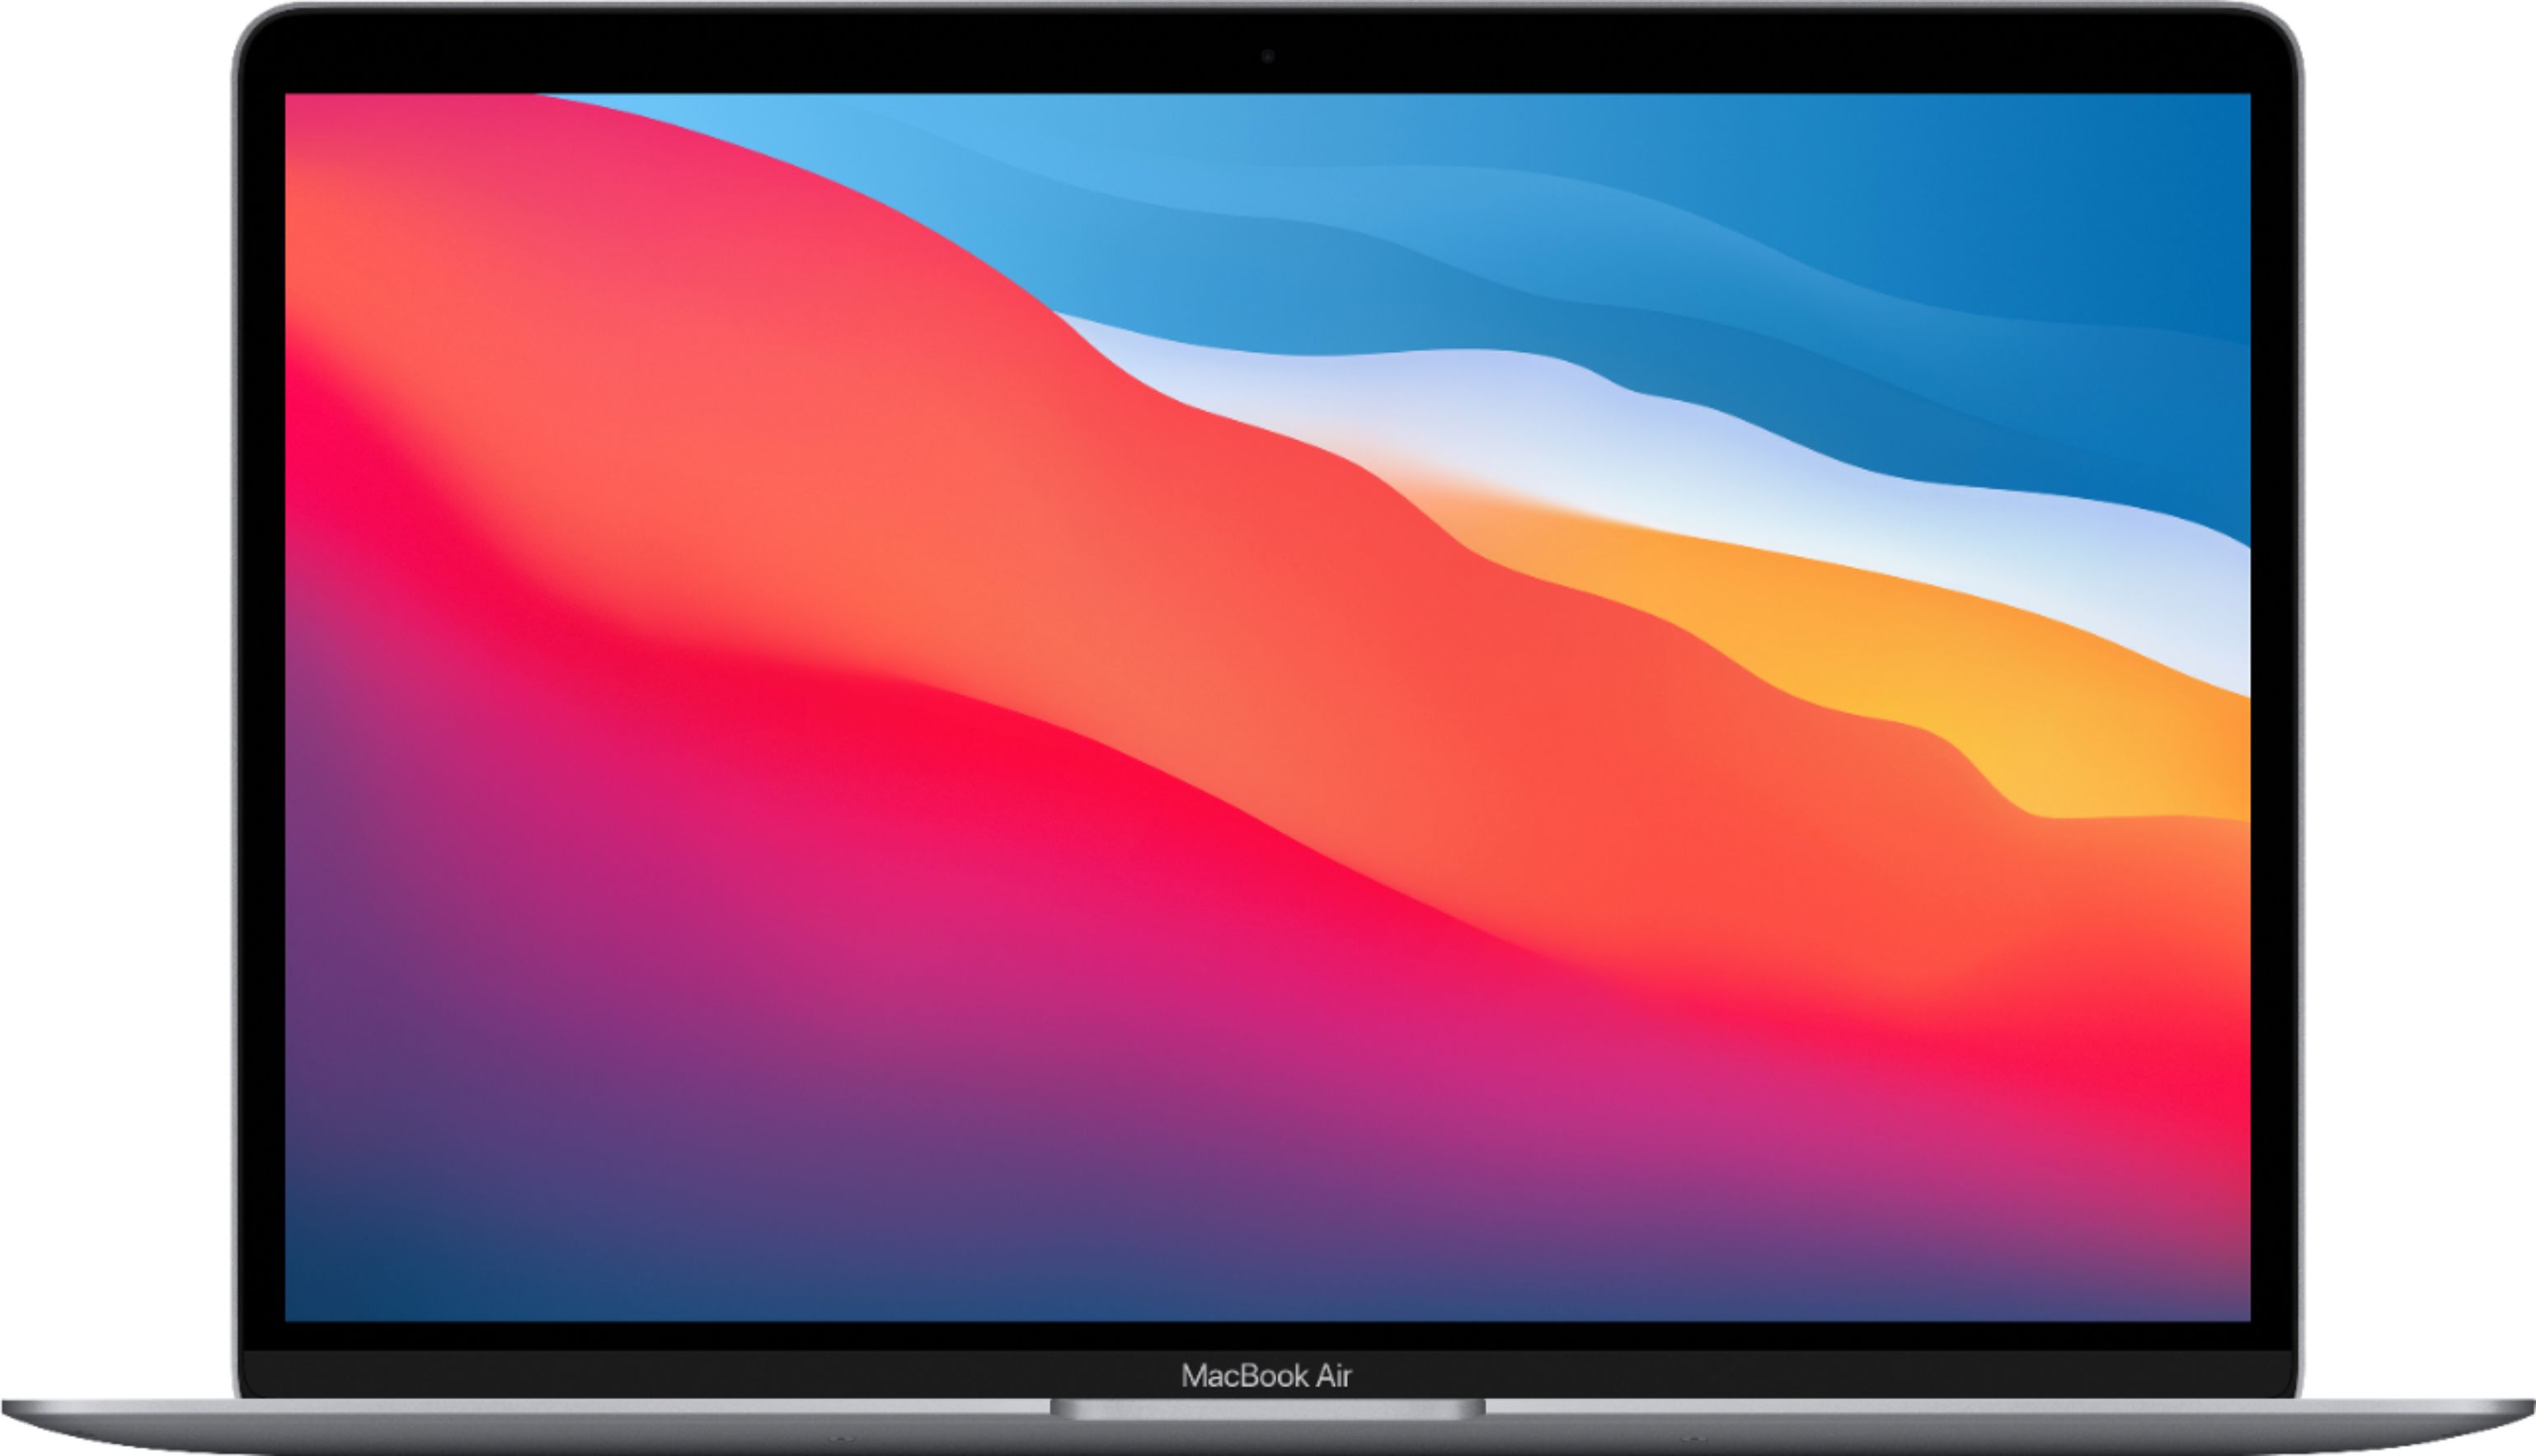 MacBook Air Laptops @ Best Buy:13.3" M1 / 8GB / 256GB (Late 2020) $749.99 + Free Shipping